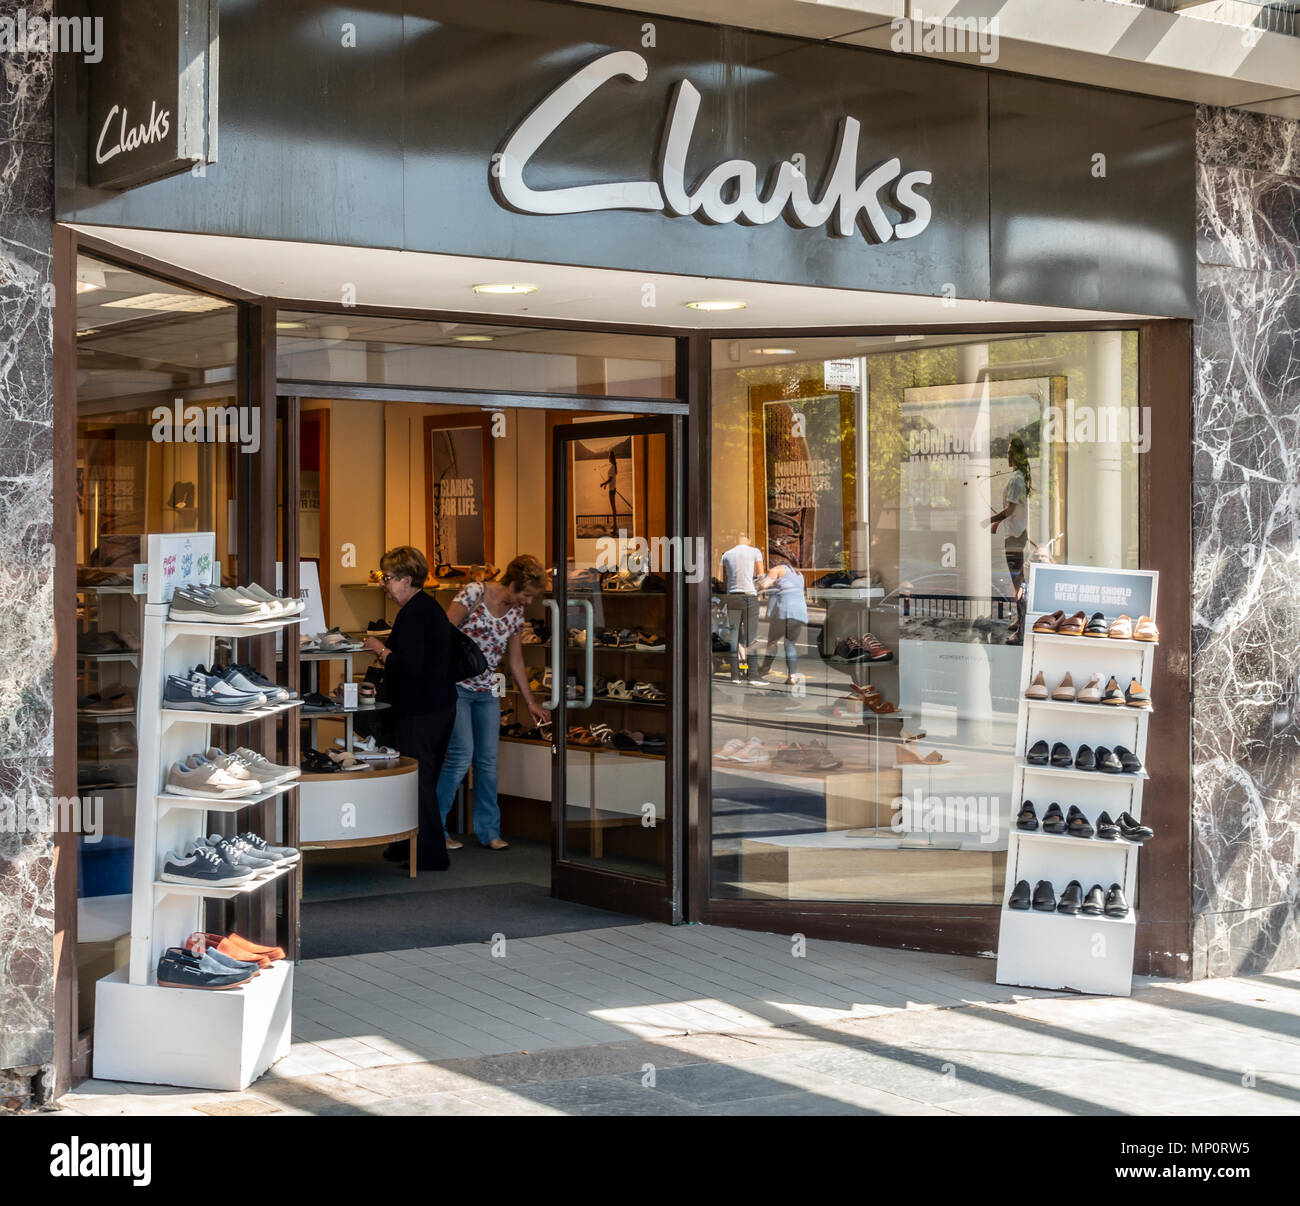 clarks shoes philippines branches off 